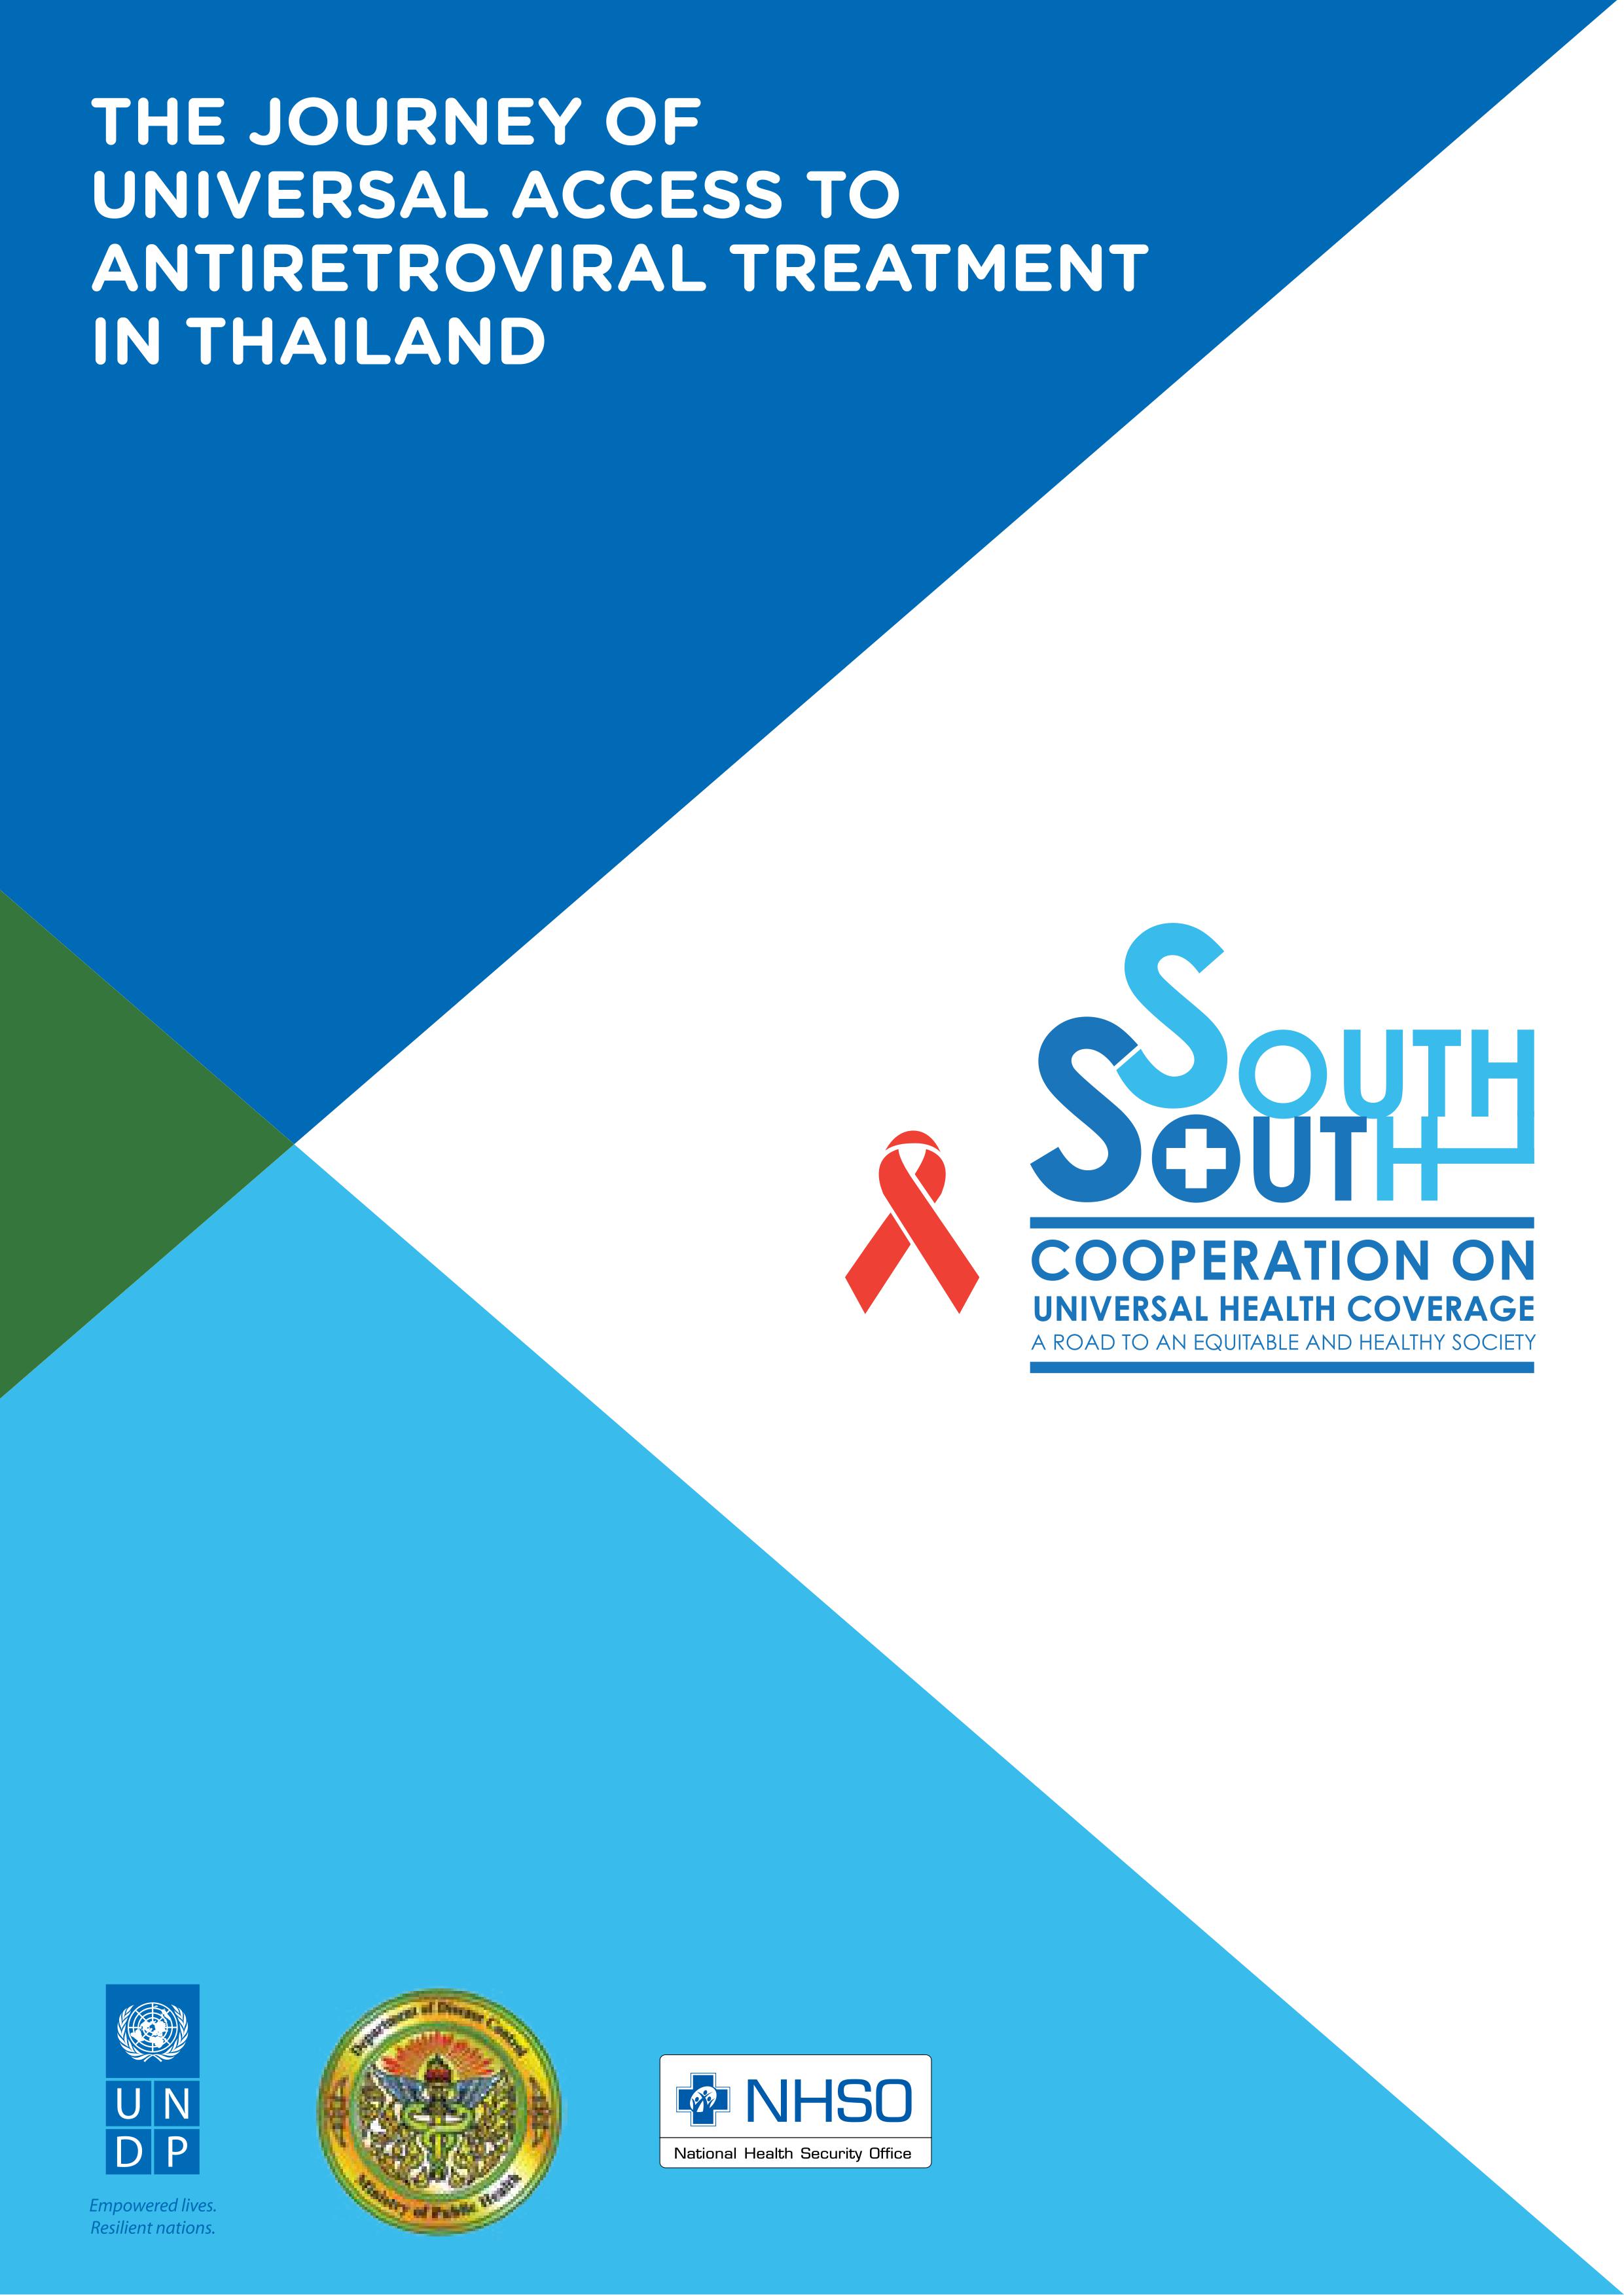 The Journey of Universal Access to Antiretroviral Treatment in Thailand